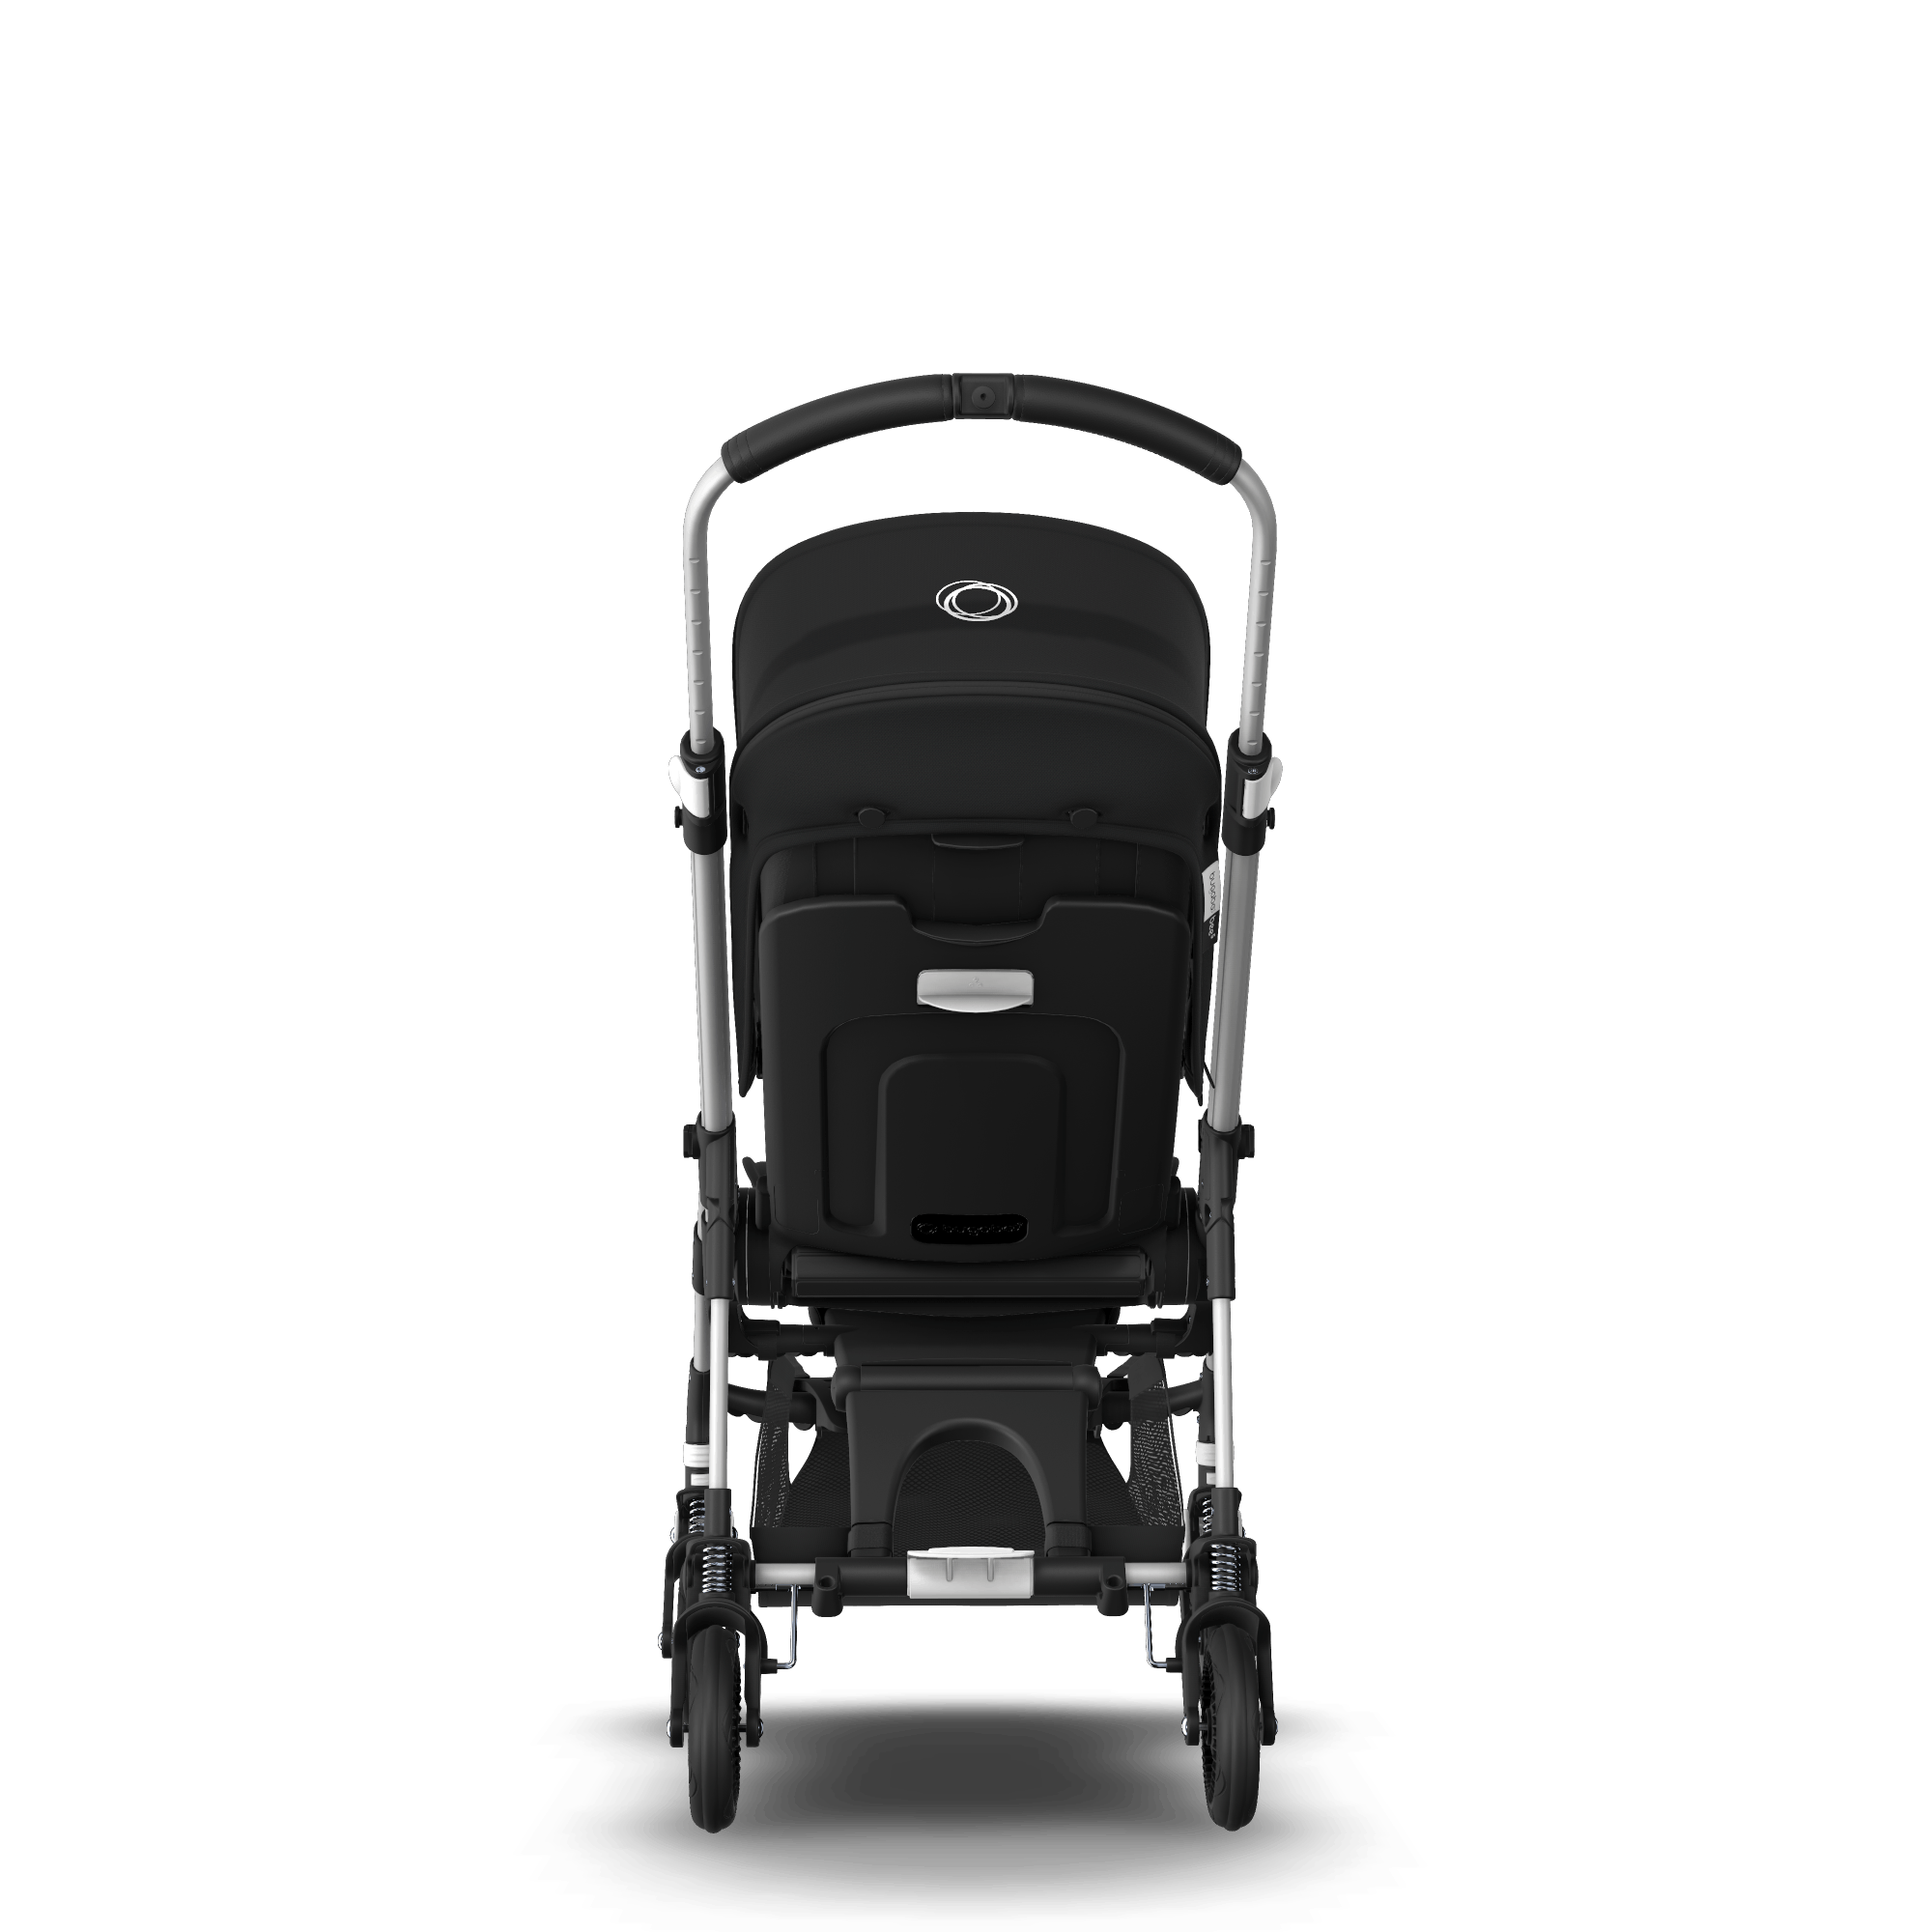 bugaboo bee car seat compatibility